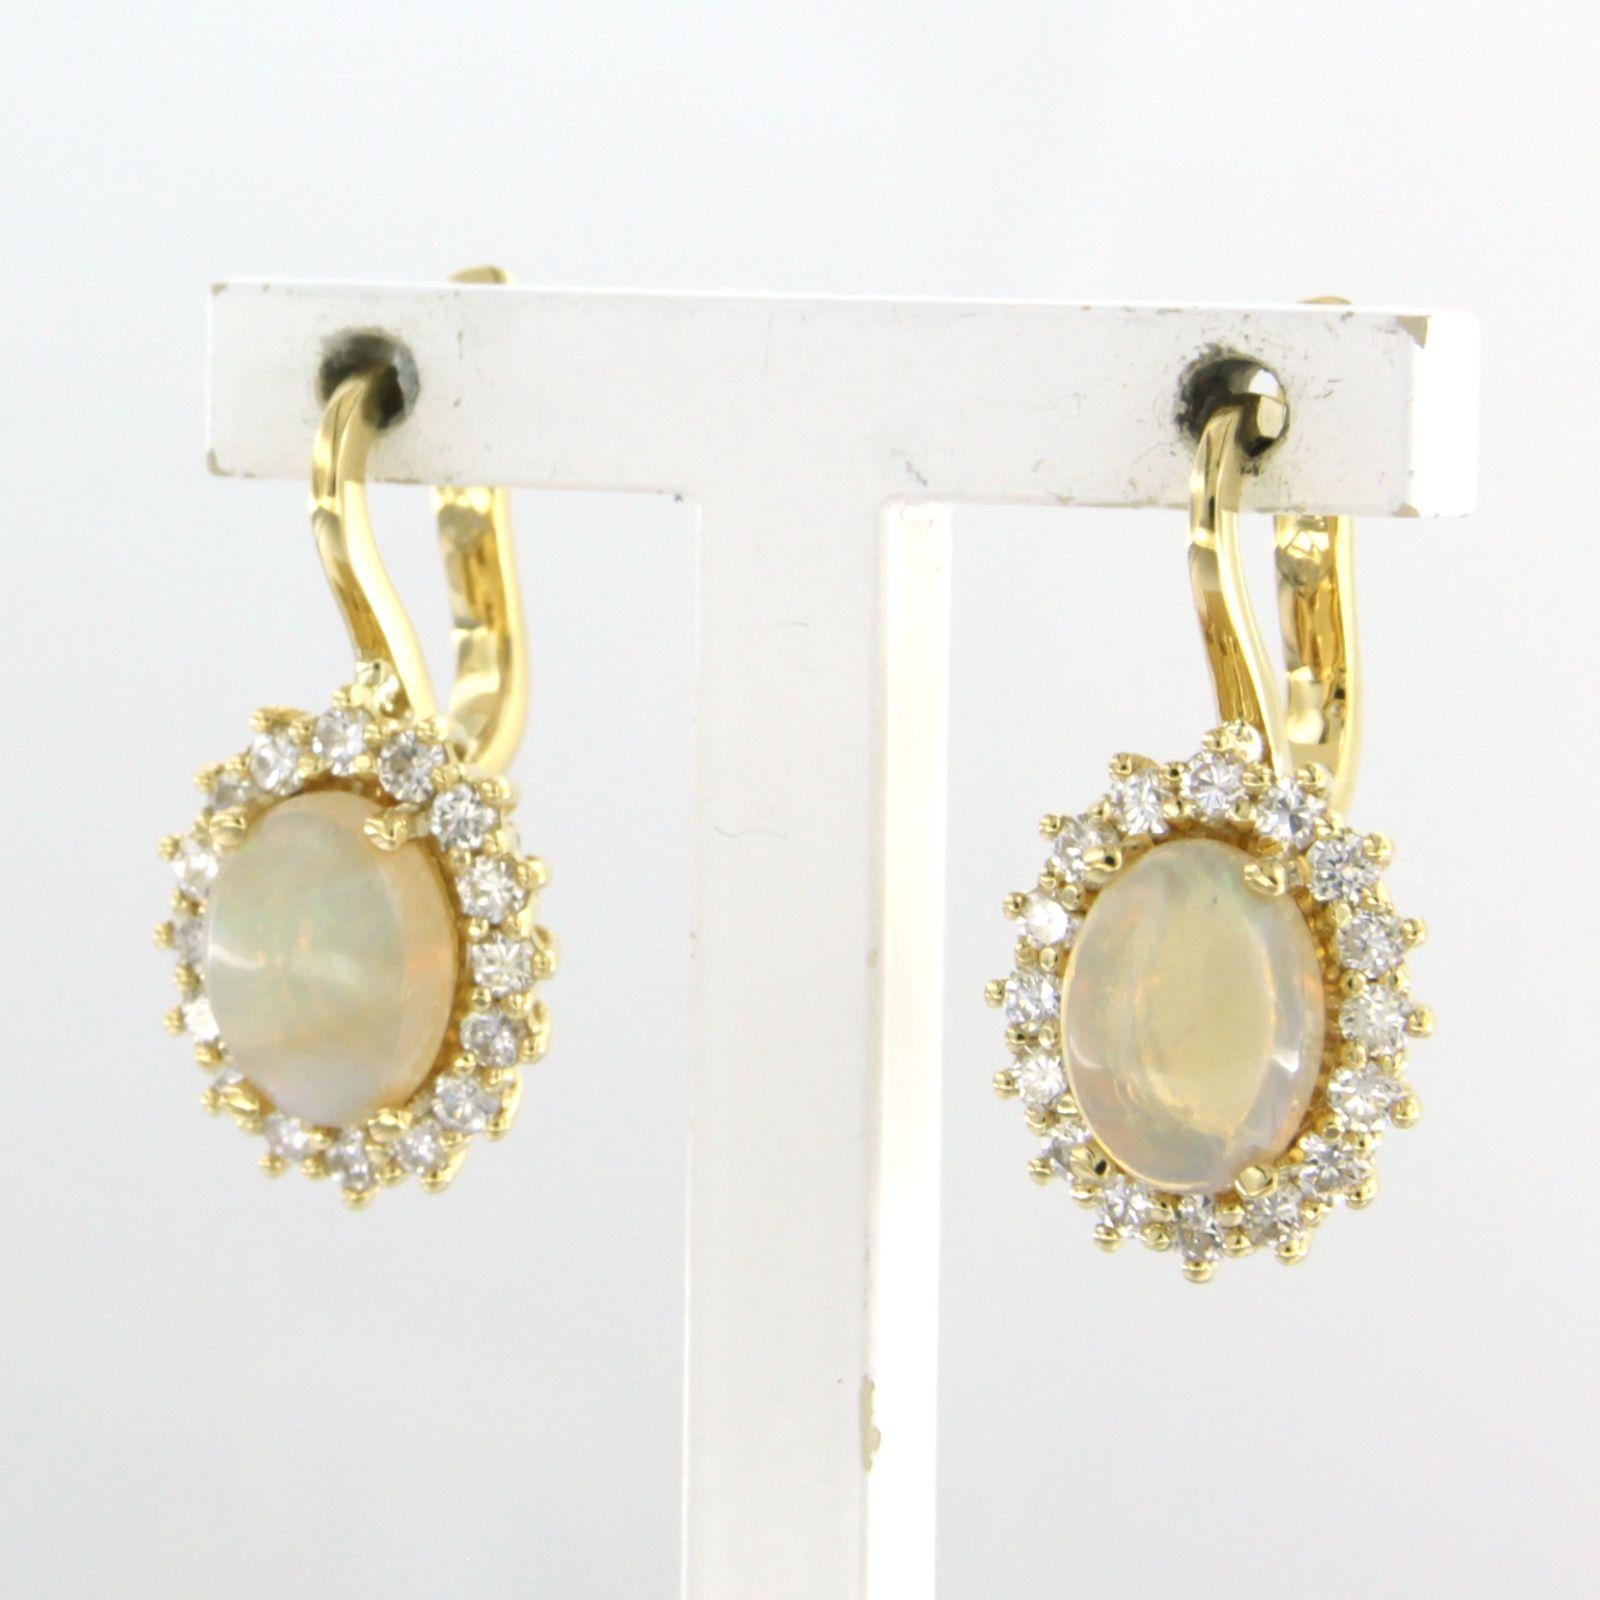 Brilliant Cut Cluster earrings set with opal and diamonds 18k yellow gold